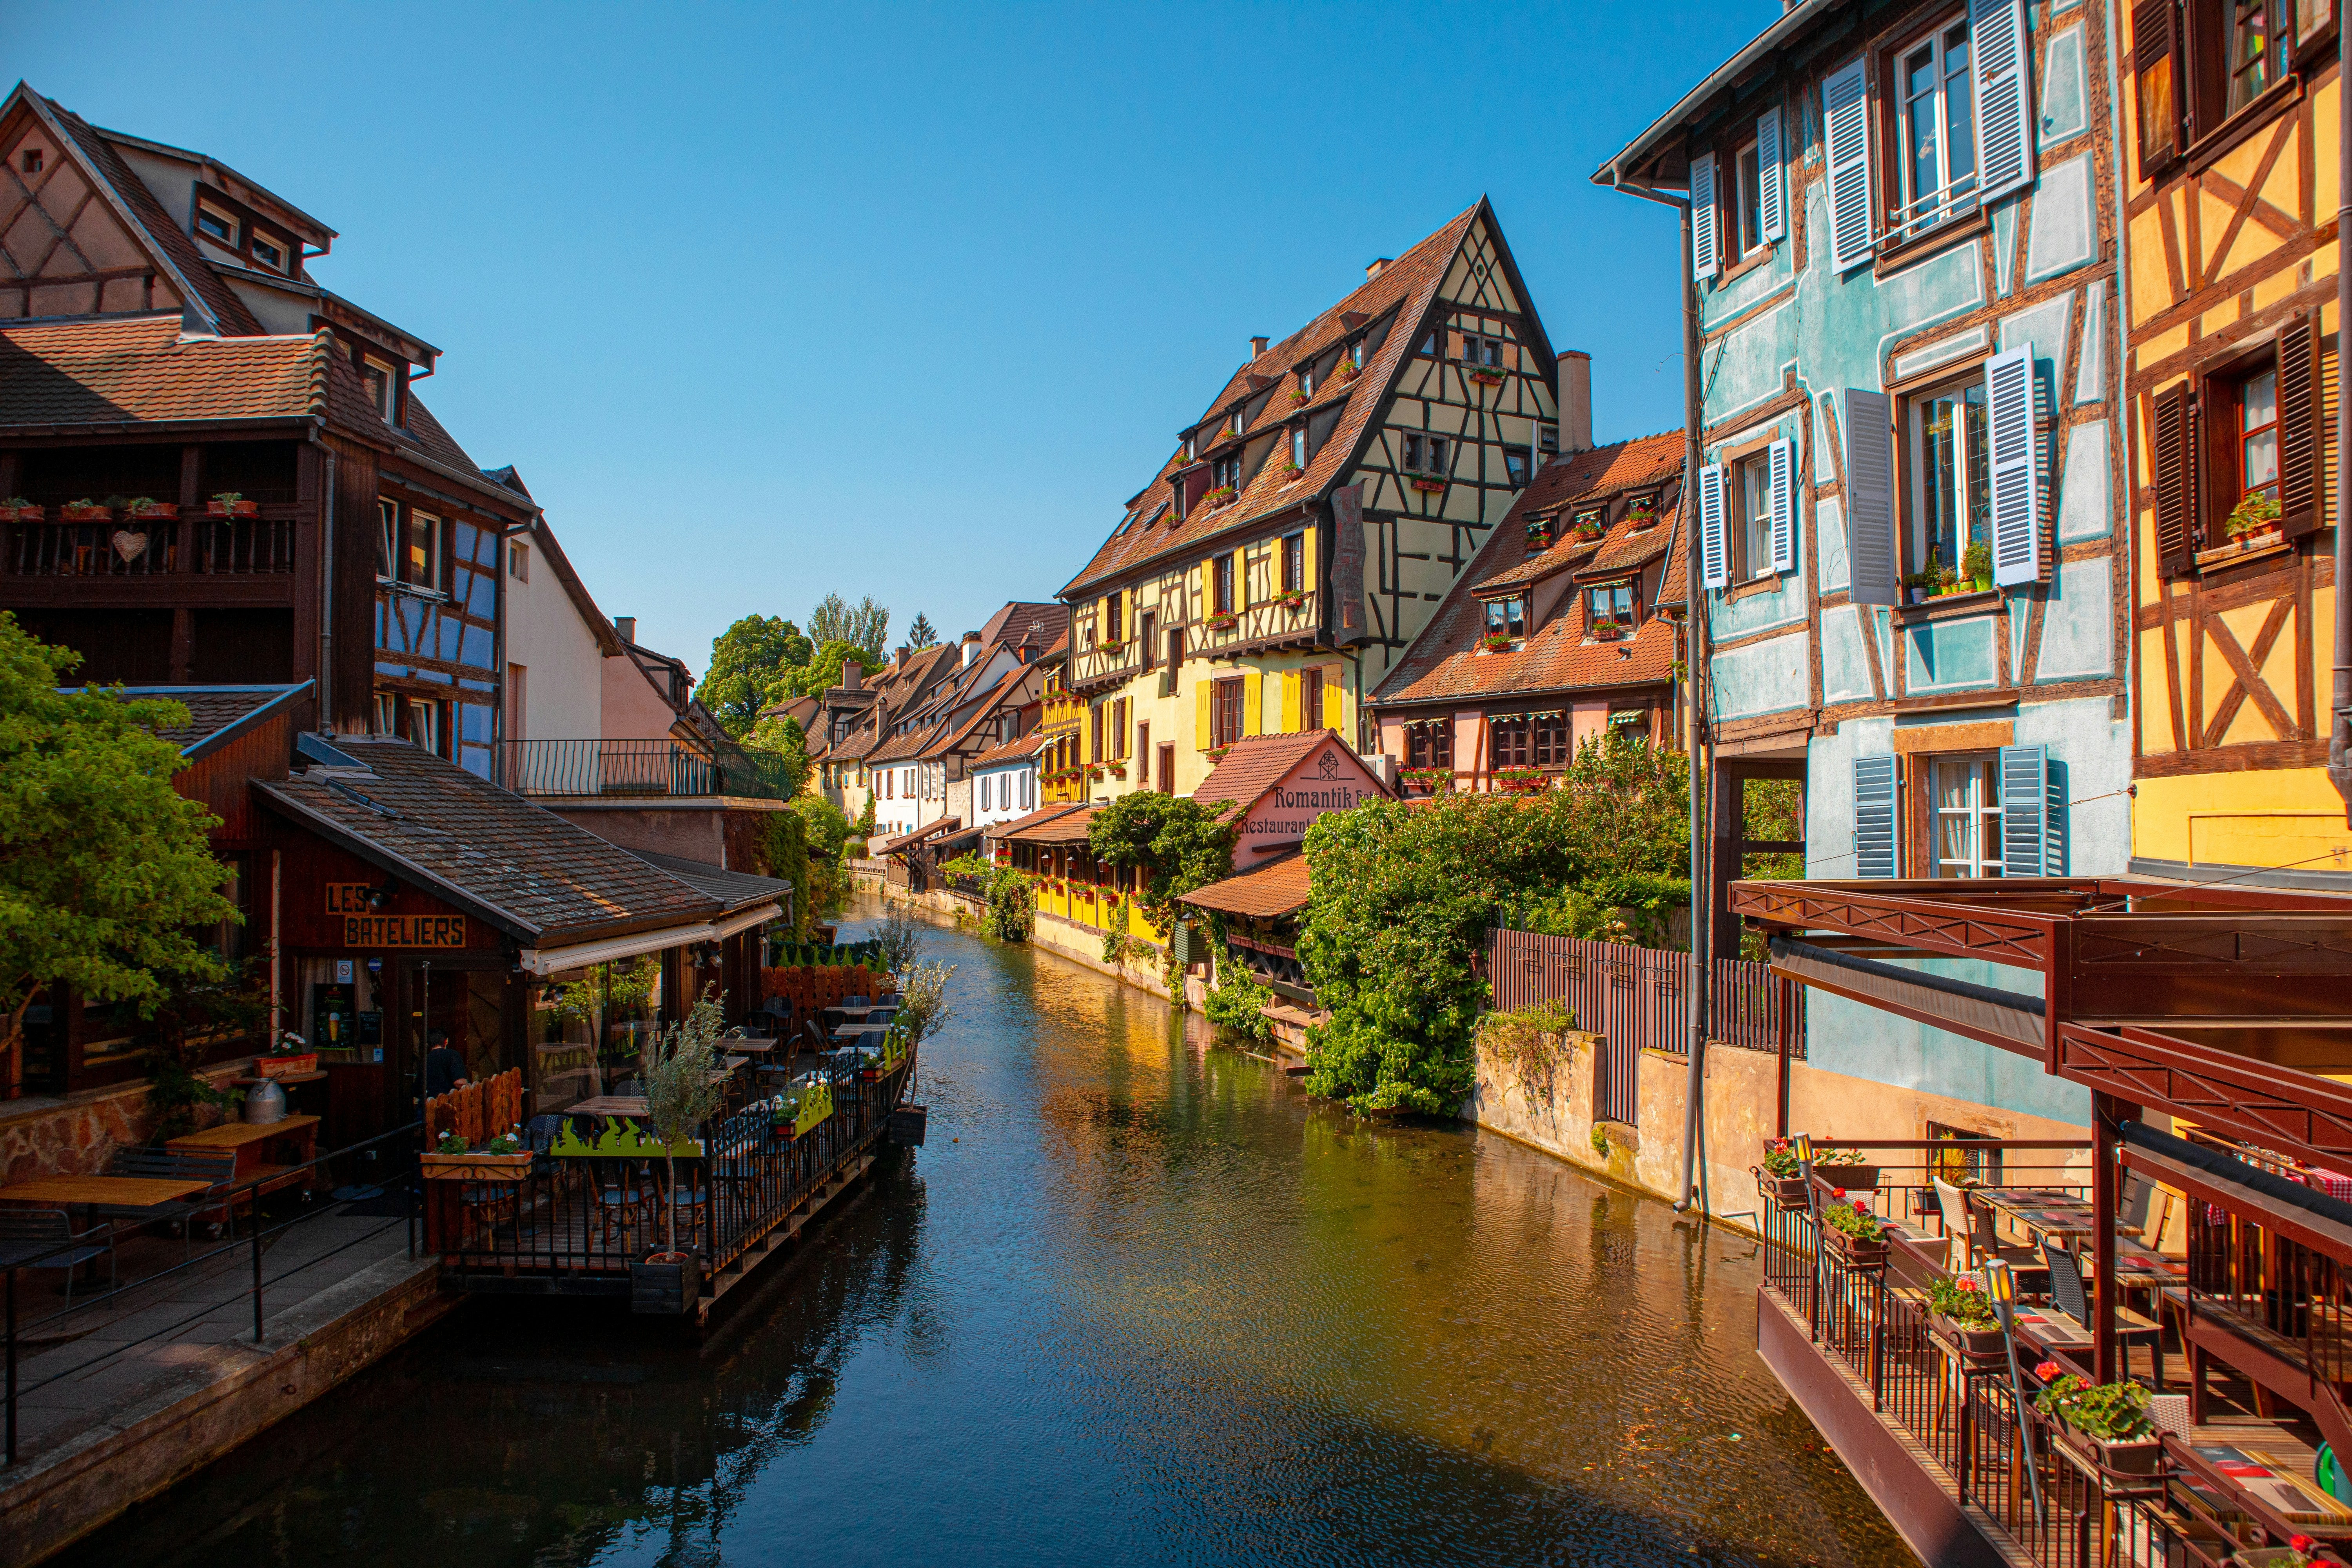 Underdone Strasbourg beats Bruges as a fairy tale base